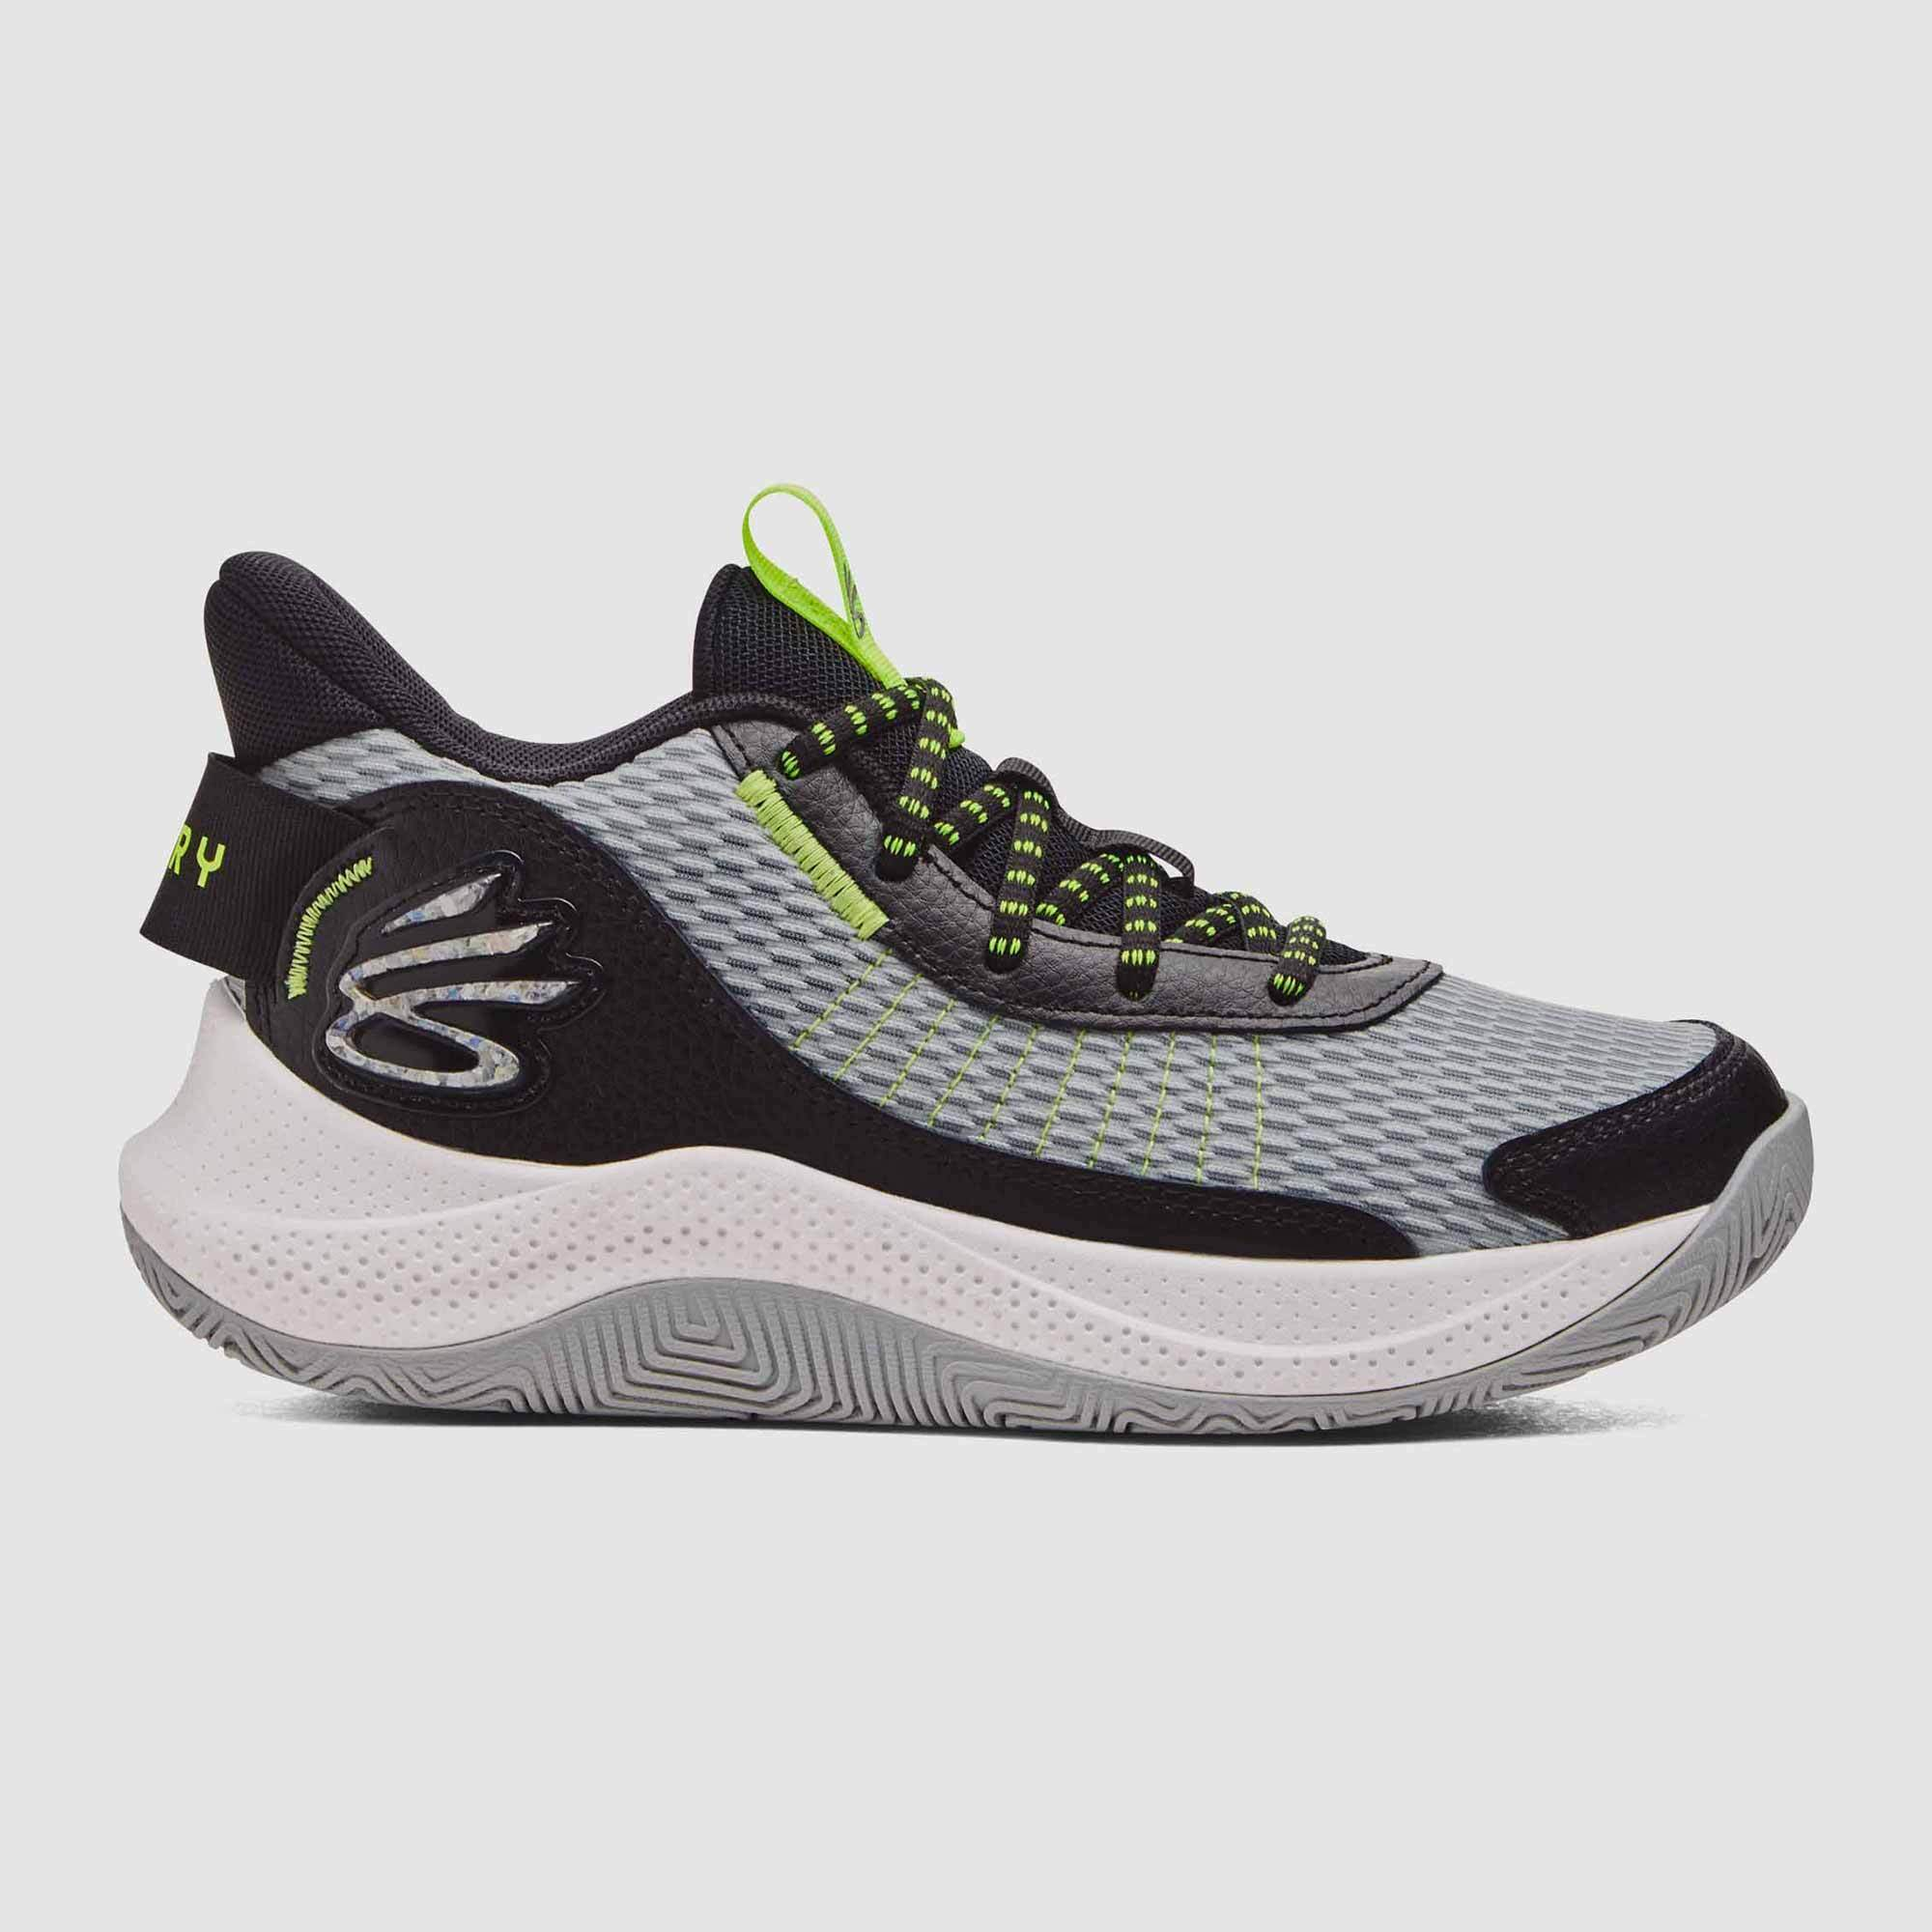 Under Armour Kids Curry 3Z7 Basketball Shoes